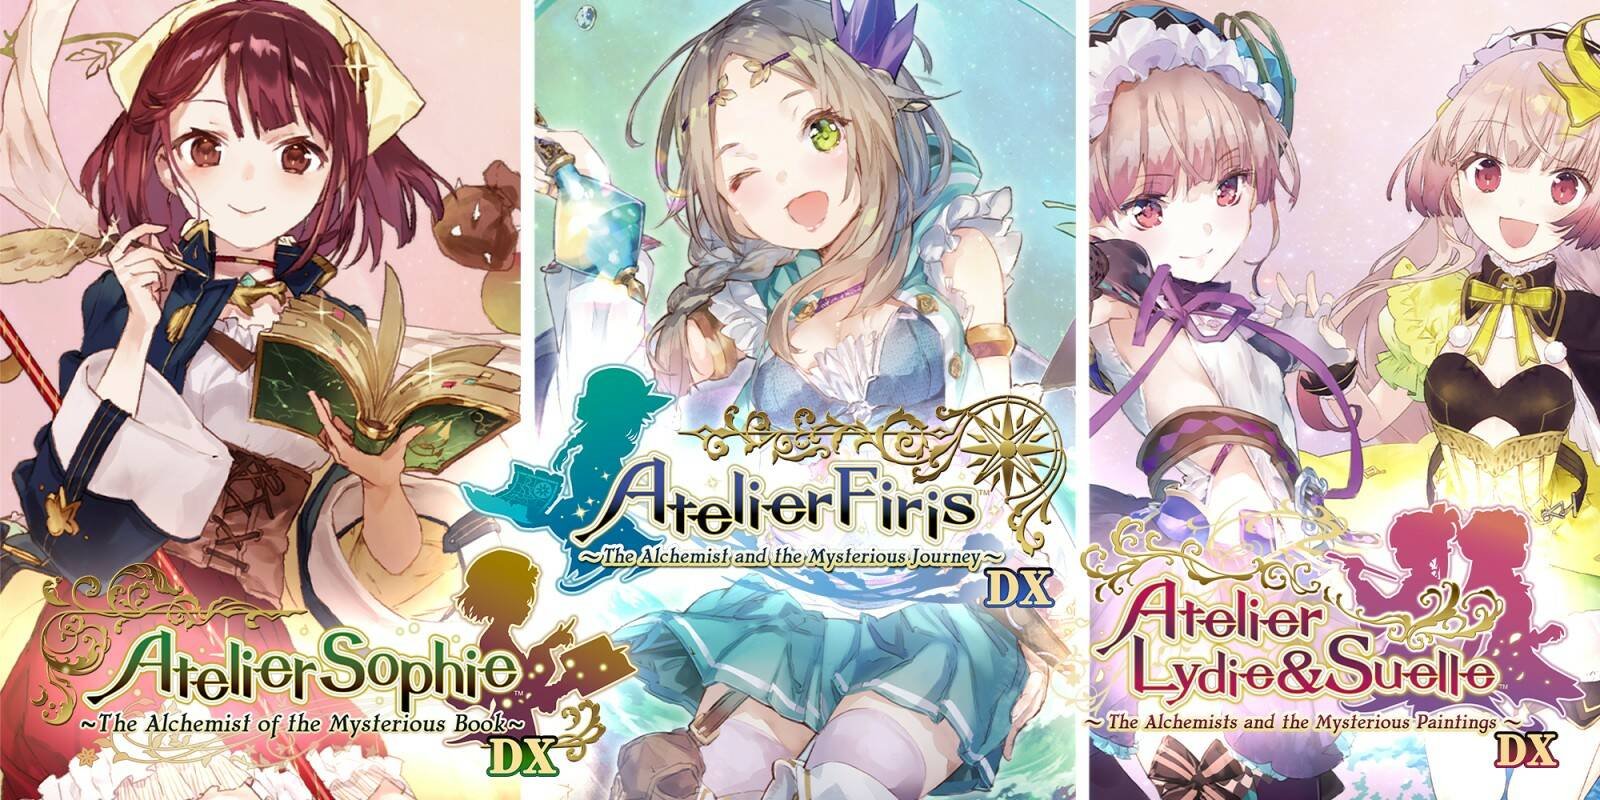 Atelier Mysterious Trilogy Deluxe Pack | Recensione - Tanti bei JRPG tutti insieme?